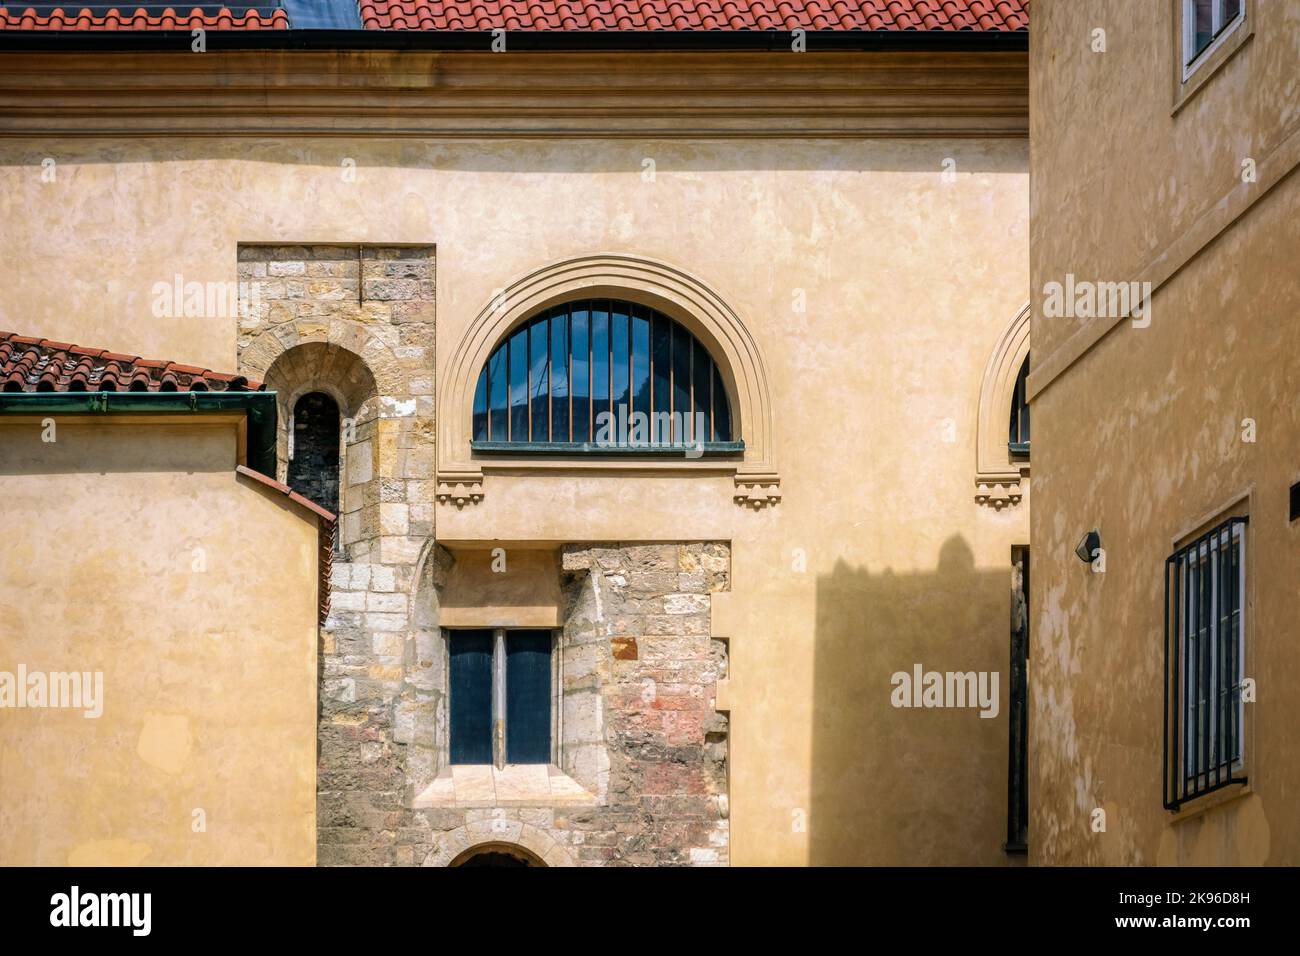 External view of the walls of the courtyard with windows of various configurations. Stock Photo